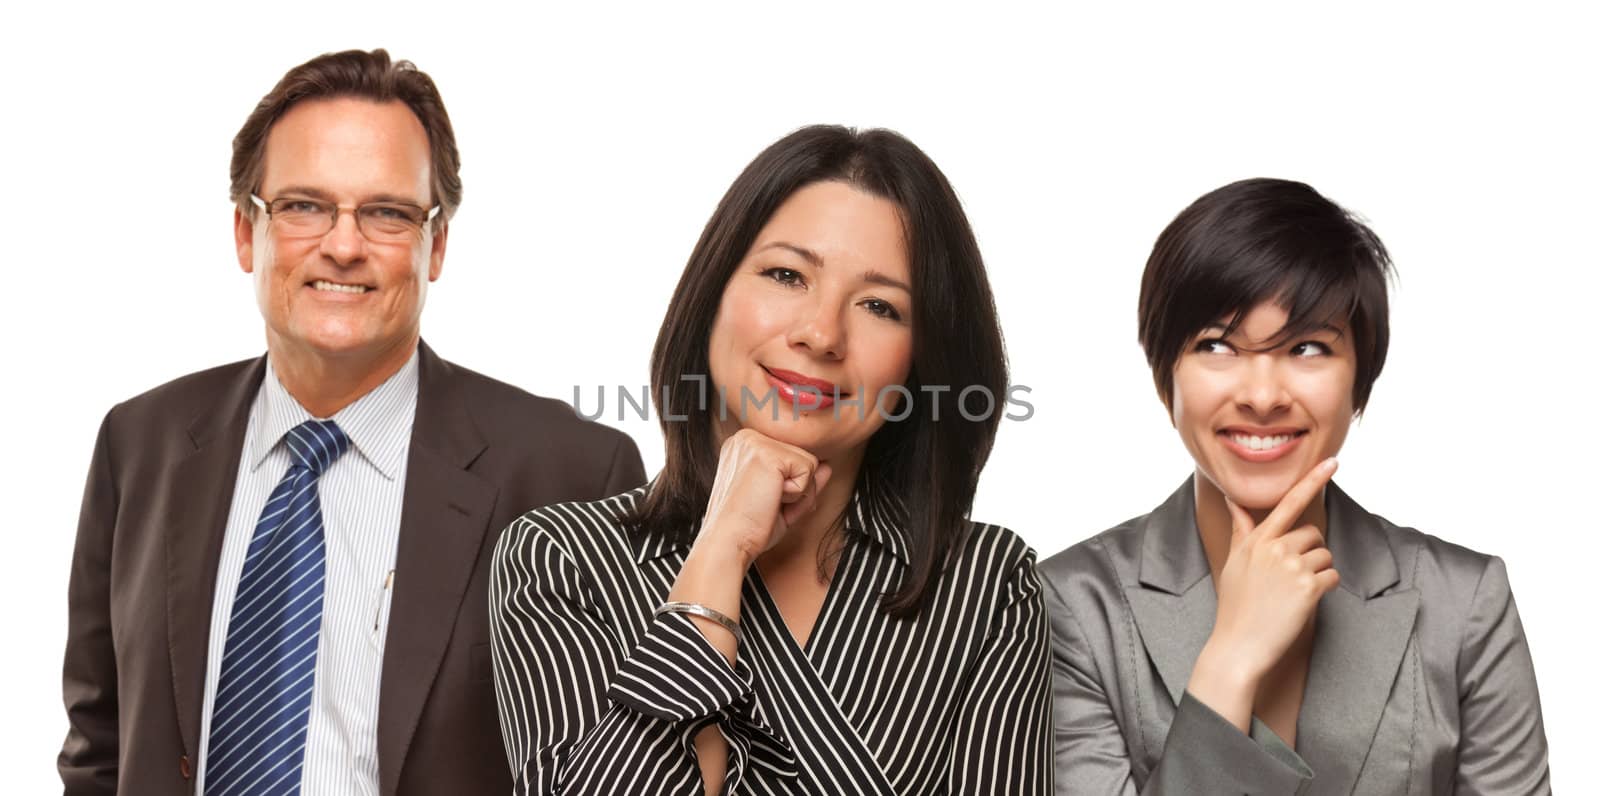 Hispanic Women and Businessman on White by Feverpitched